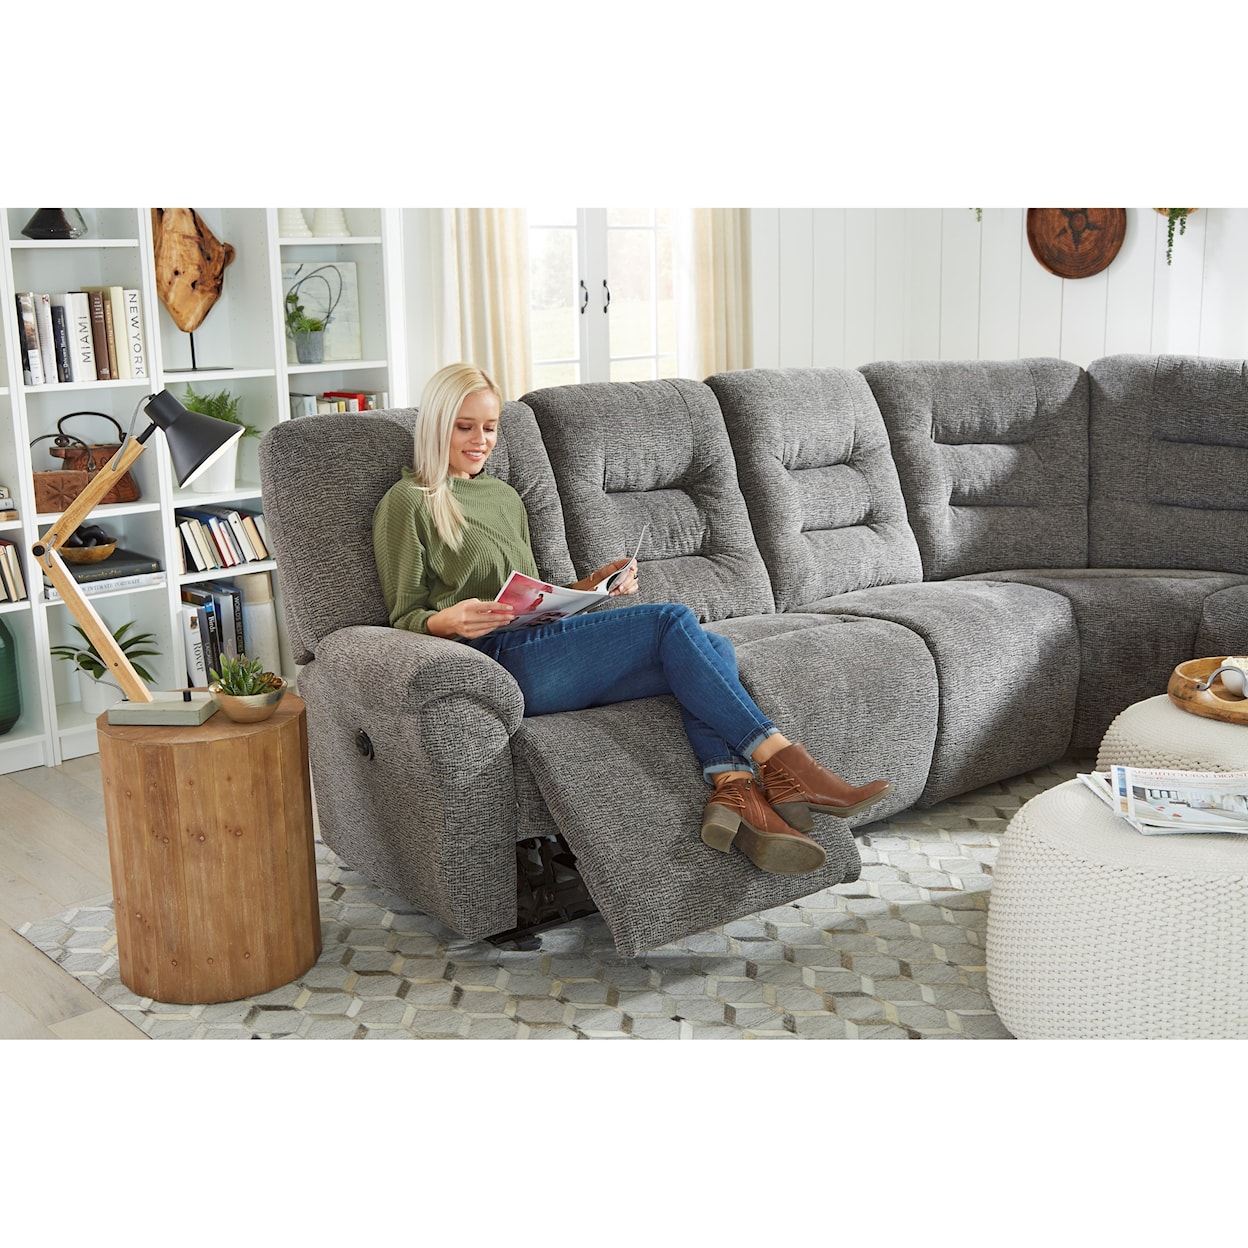 Best Home Furnishings Unity 5-Seat Reclining Sectional Sofa